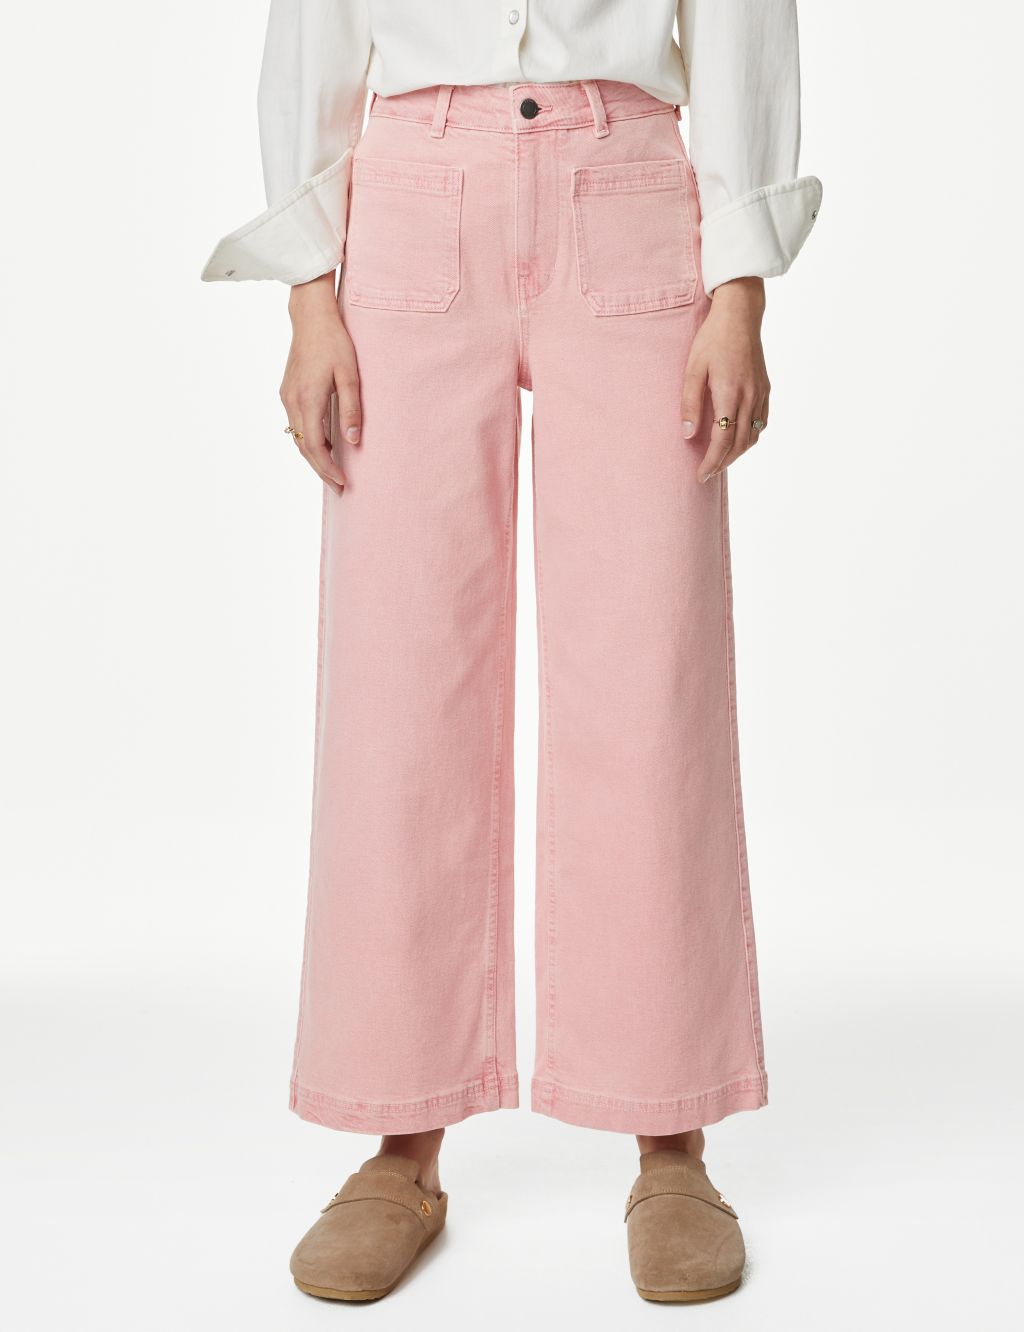 Tea Dyed Wide Leg Ankle Grazer Jeans image 3